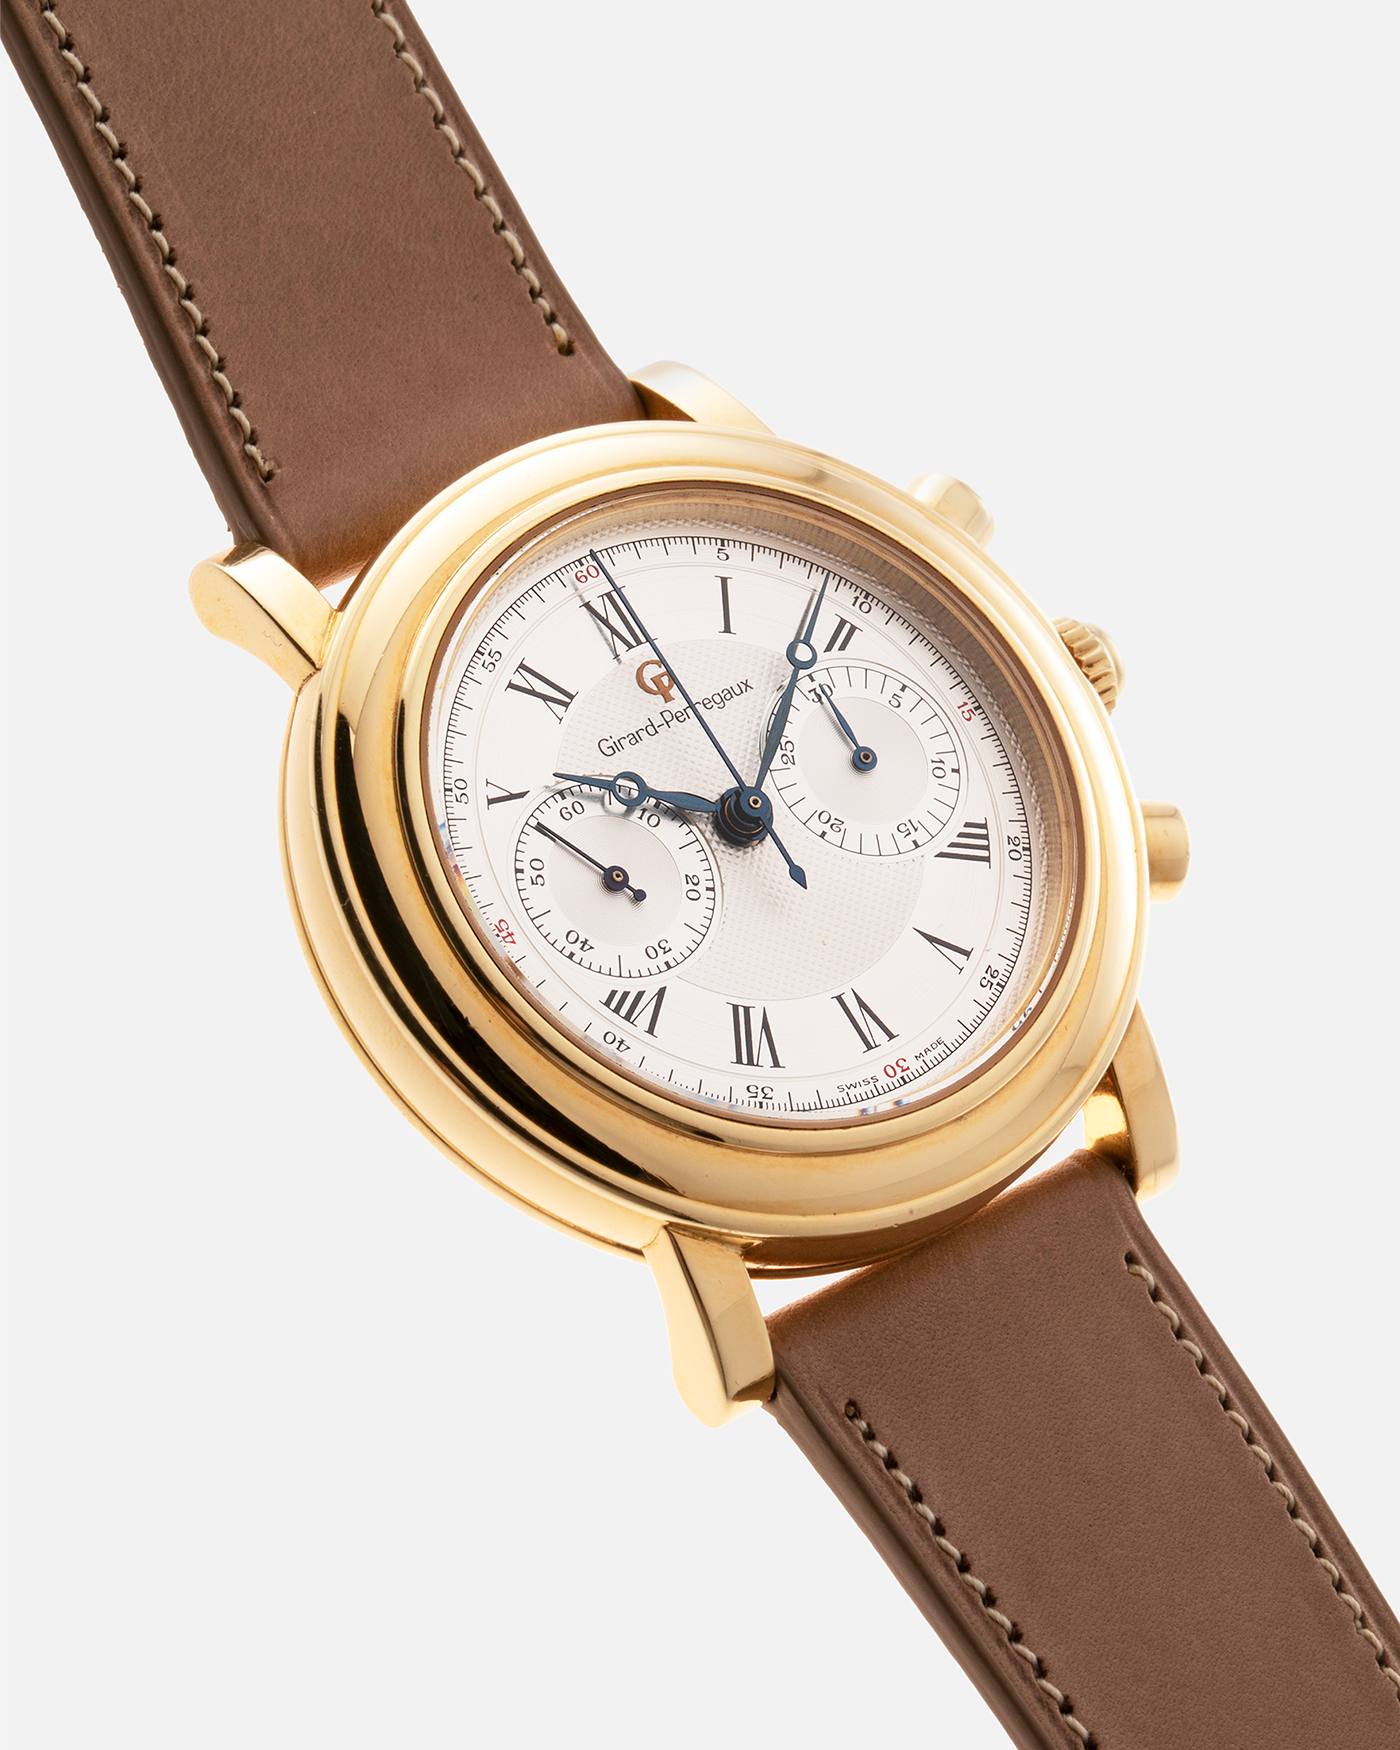 Brand: Girard Perregaux Year: 1990’s Reference Number: 47930 Material: 18k Yellow Gold Movement: Lemania Cal. 1872  Case Diameter: 38mm Strap: Nostime Tan Strap and 18k Yellow Gold Girard Perregaux Tan Buckle